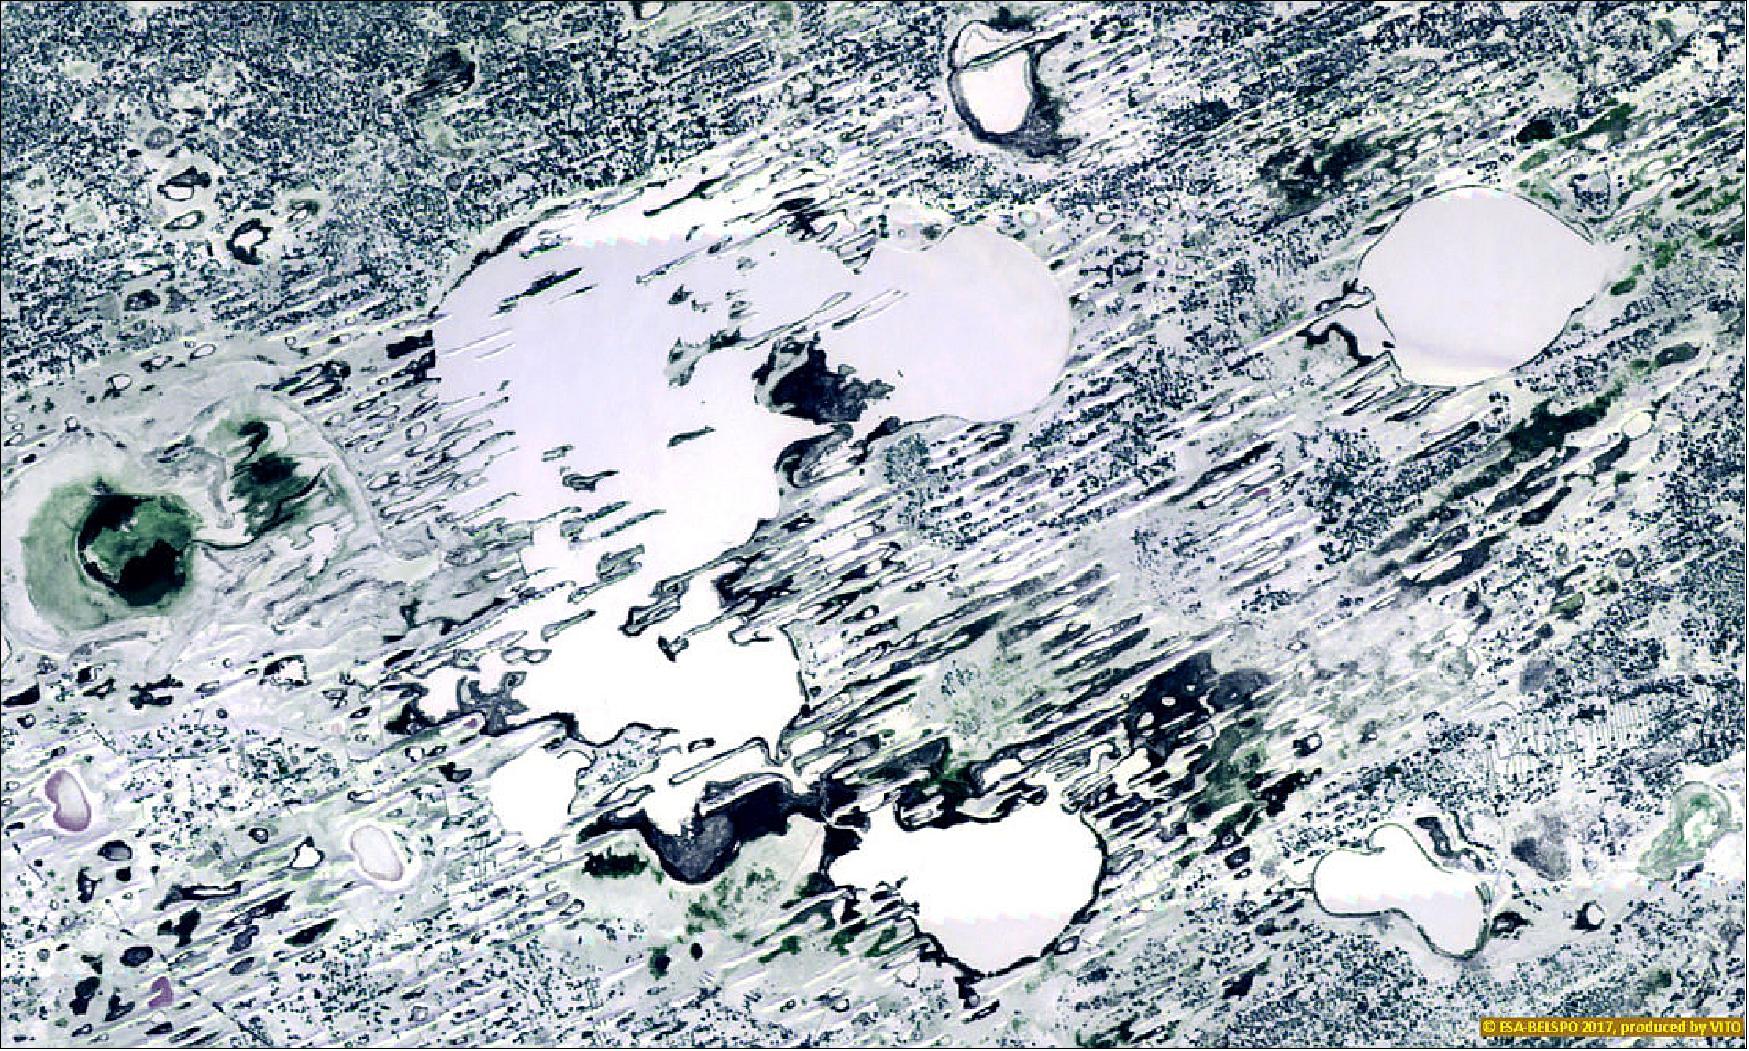 Figure 31: This 100 m resolution image was acquired by PROBA-V on 1 December 2016 (image credit: ESA/Belspo – produced by VITO)